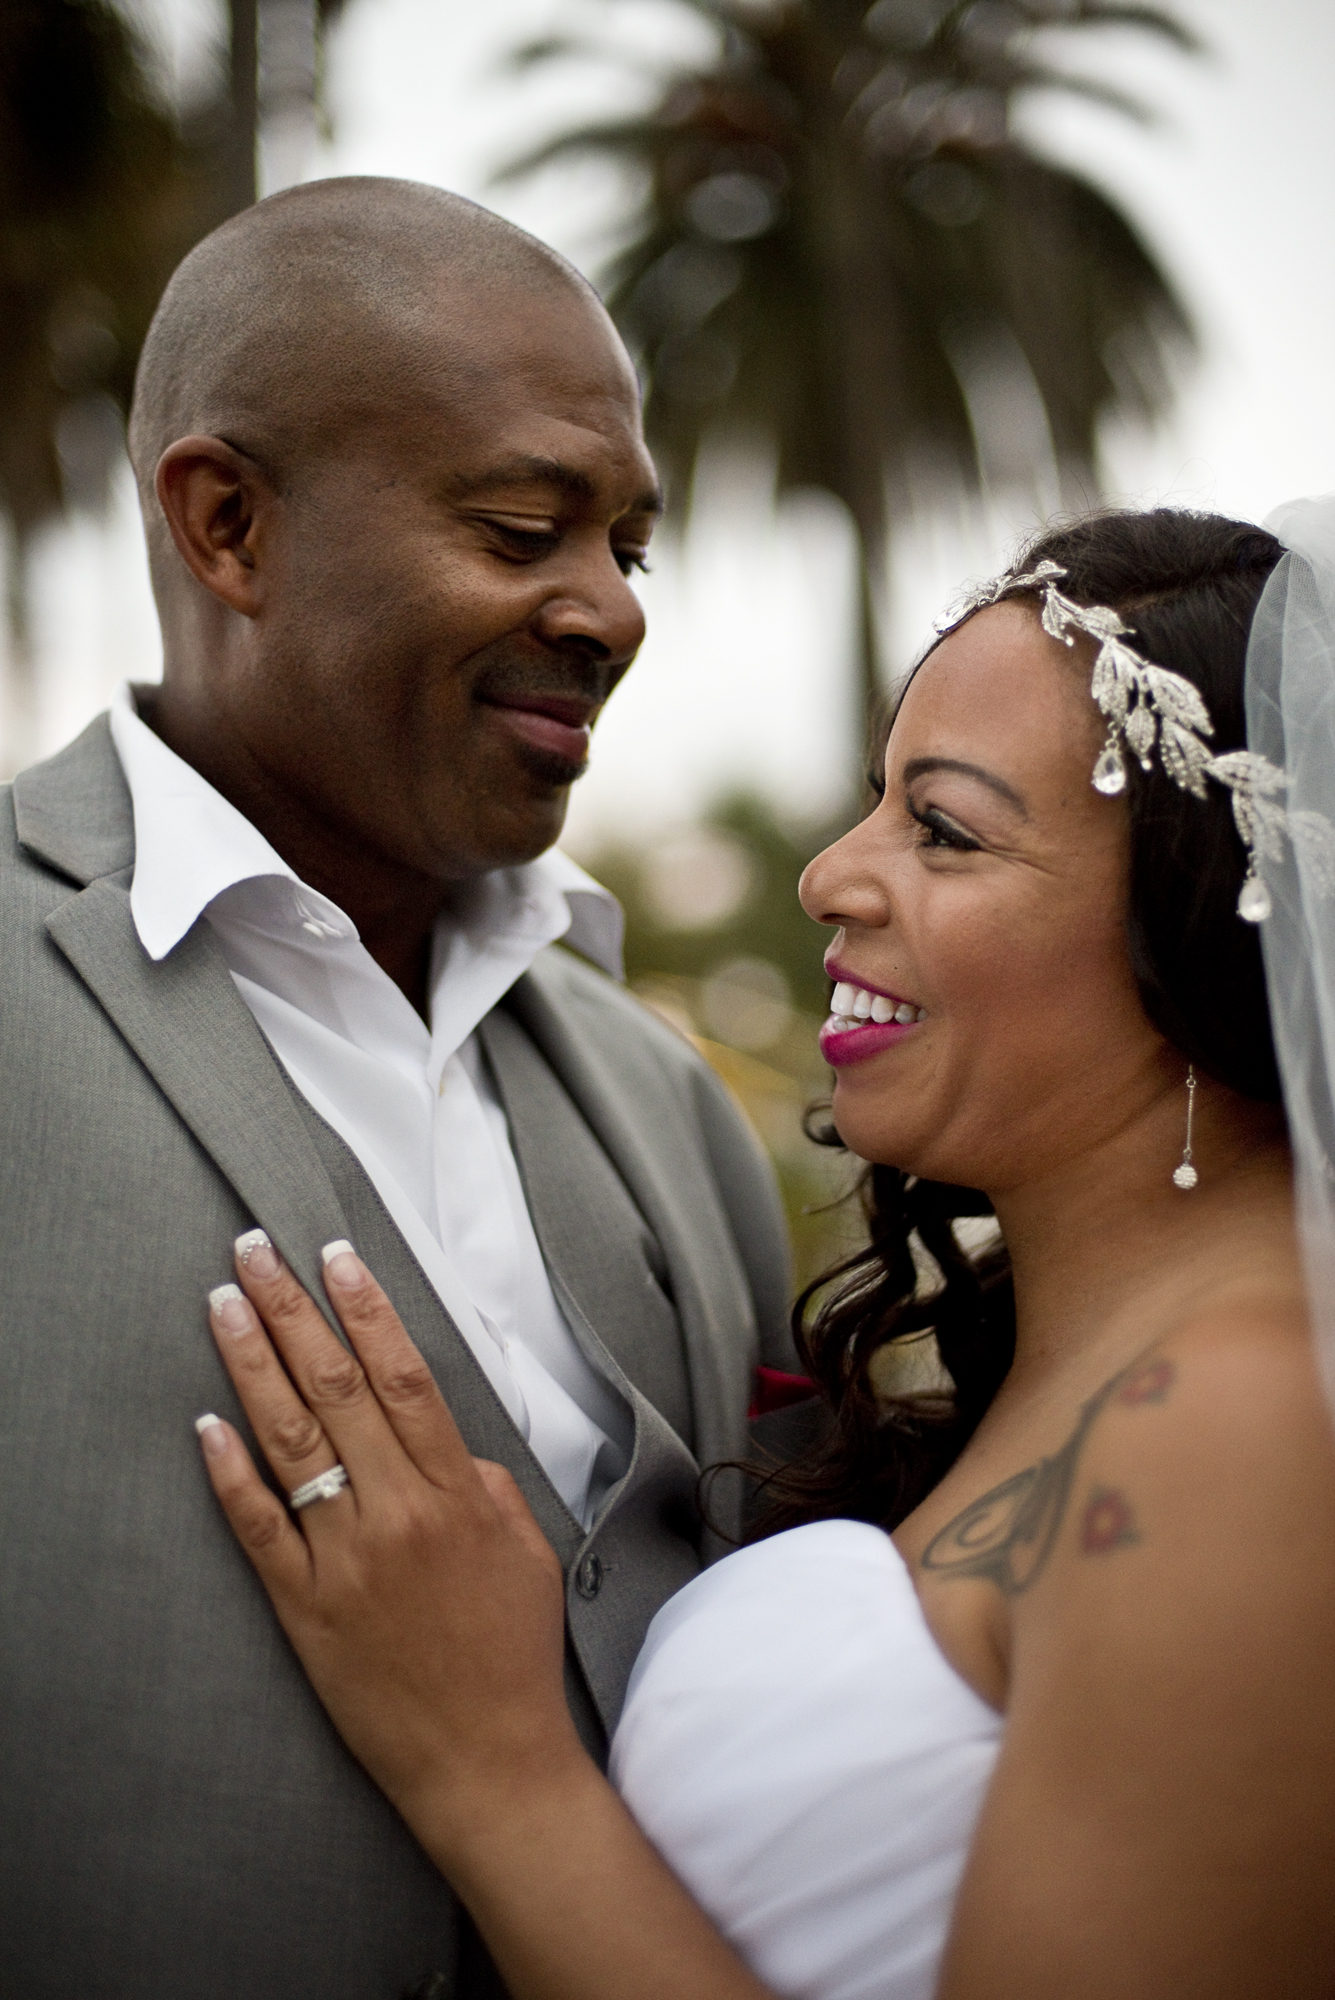 Lionel Hubbard, 47, from Long Beach, CA, marries his bride, Shannon Fowler, 38, from Long Beach, CA on Saturday, May 14, 2016 at the Laguna Beach Gazebo in Laguna Beach, CA in front of their closest friends and family members.  The bride and groom lived across from each other in the same apartment community for three years, never meeting.  Then one day, Fowler locked herself out and asked Hubbard for help.  The rest is history. 